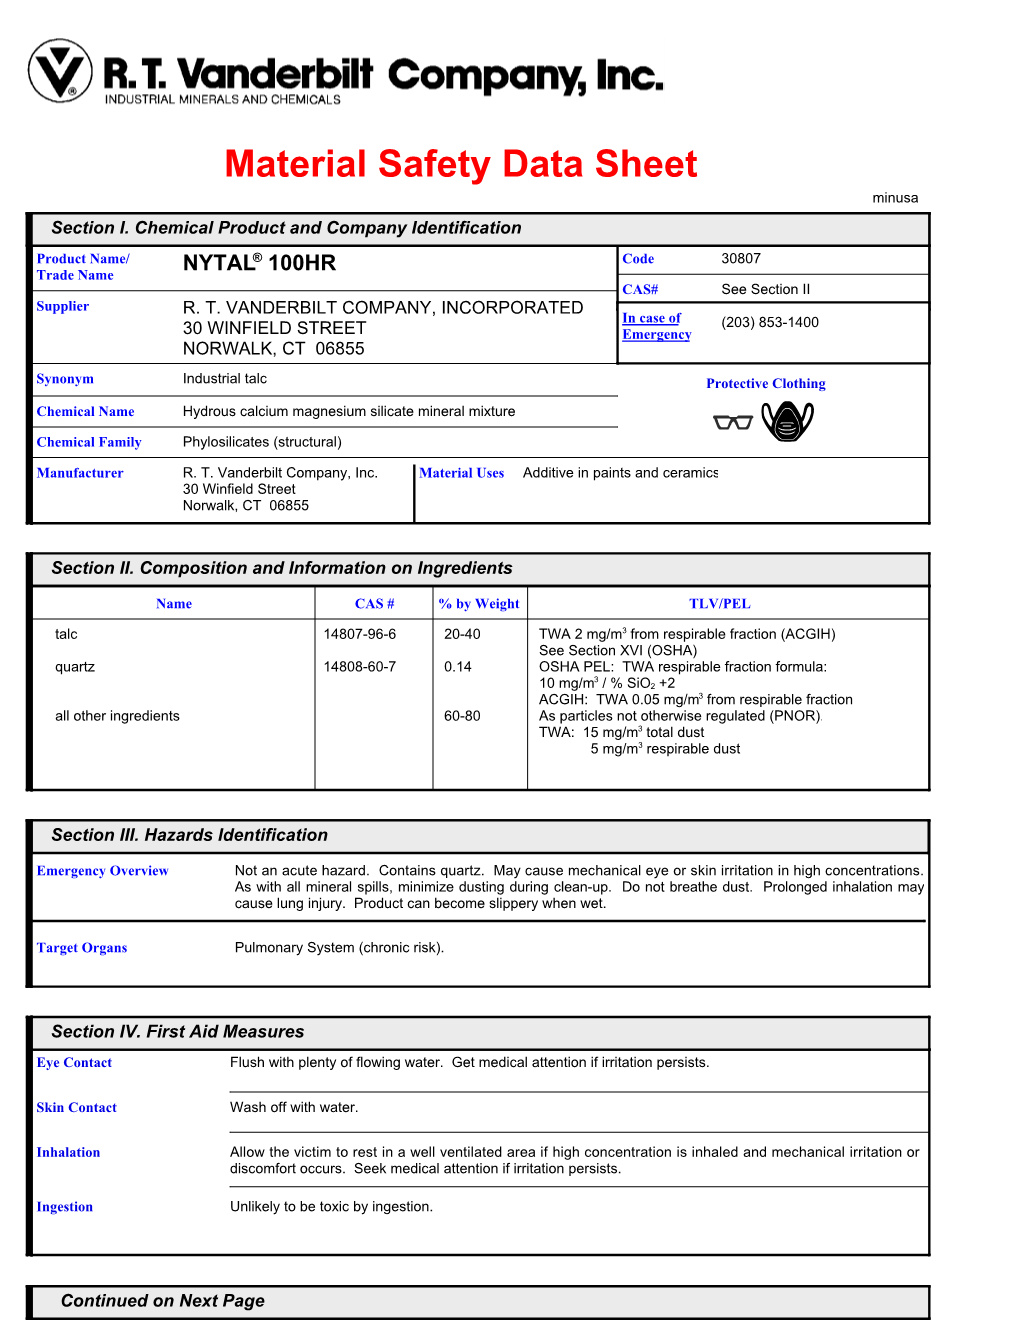 Material Safety Data Sheet Minusa Section I